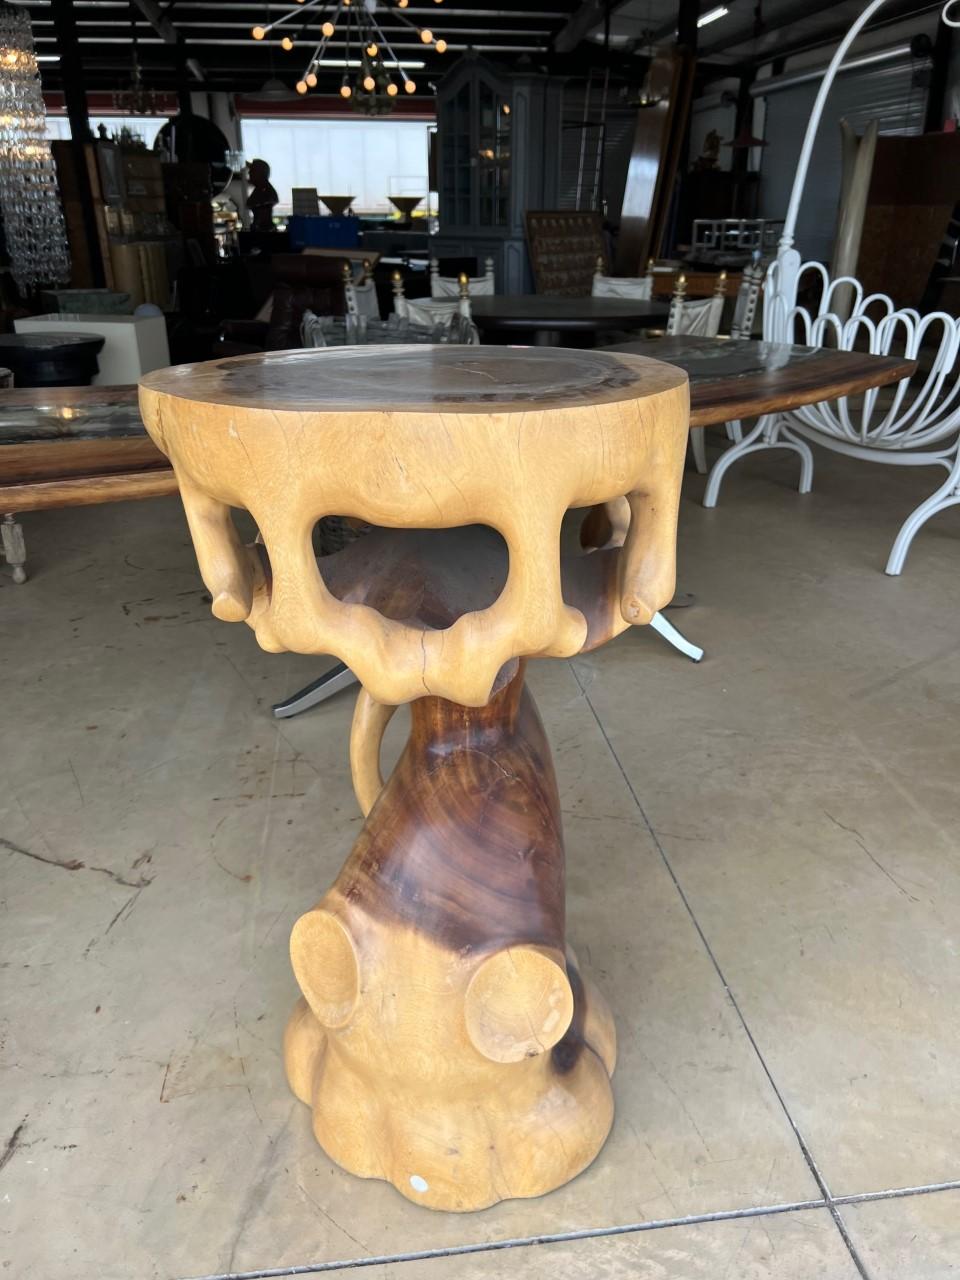 Beautiful and heavy truffle solid wood trunk pedestal and can also be use as side table.

A truffle trunk pedestal is a luxury furniture piece made of hand-carved solid wood trunk with a glossy finish light and dark walnut finish. It can be used